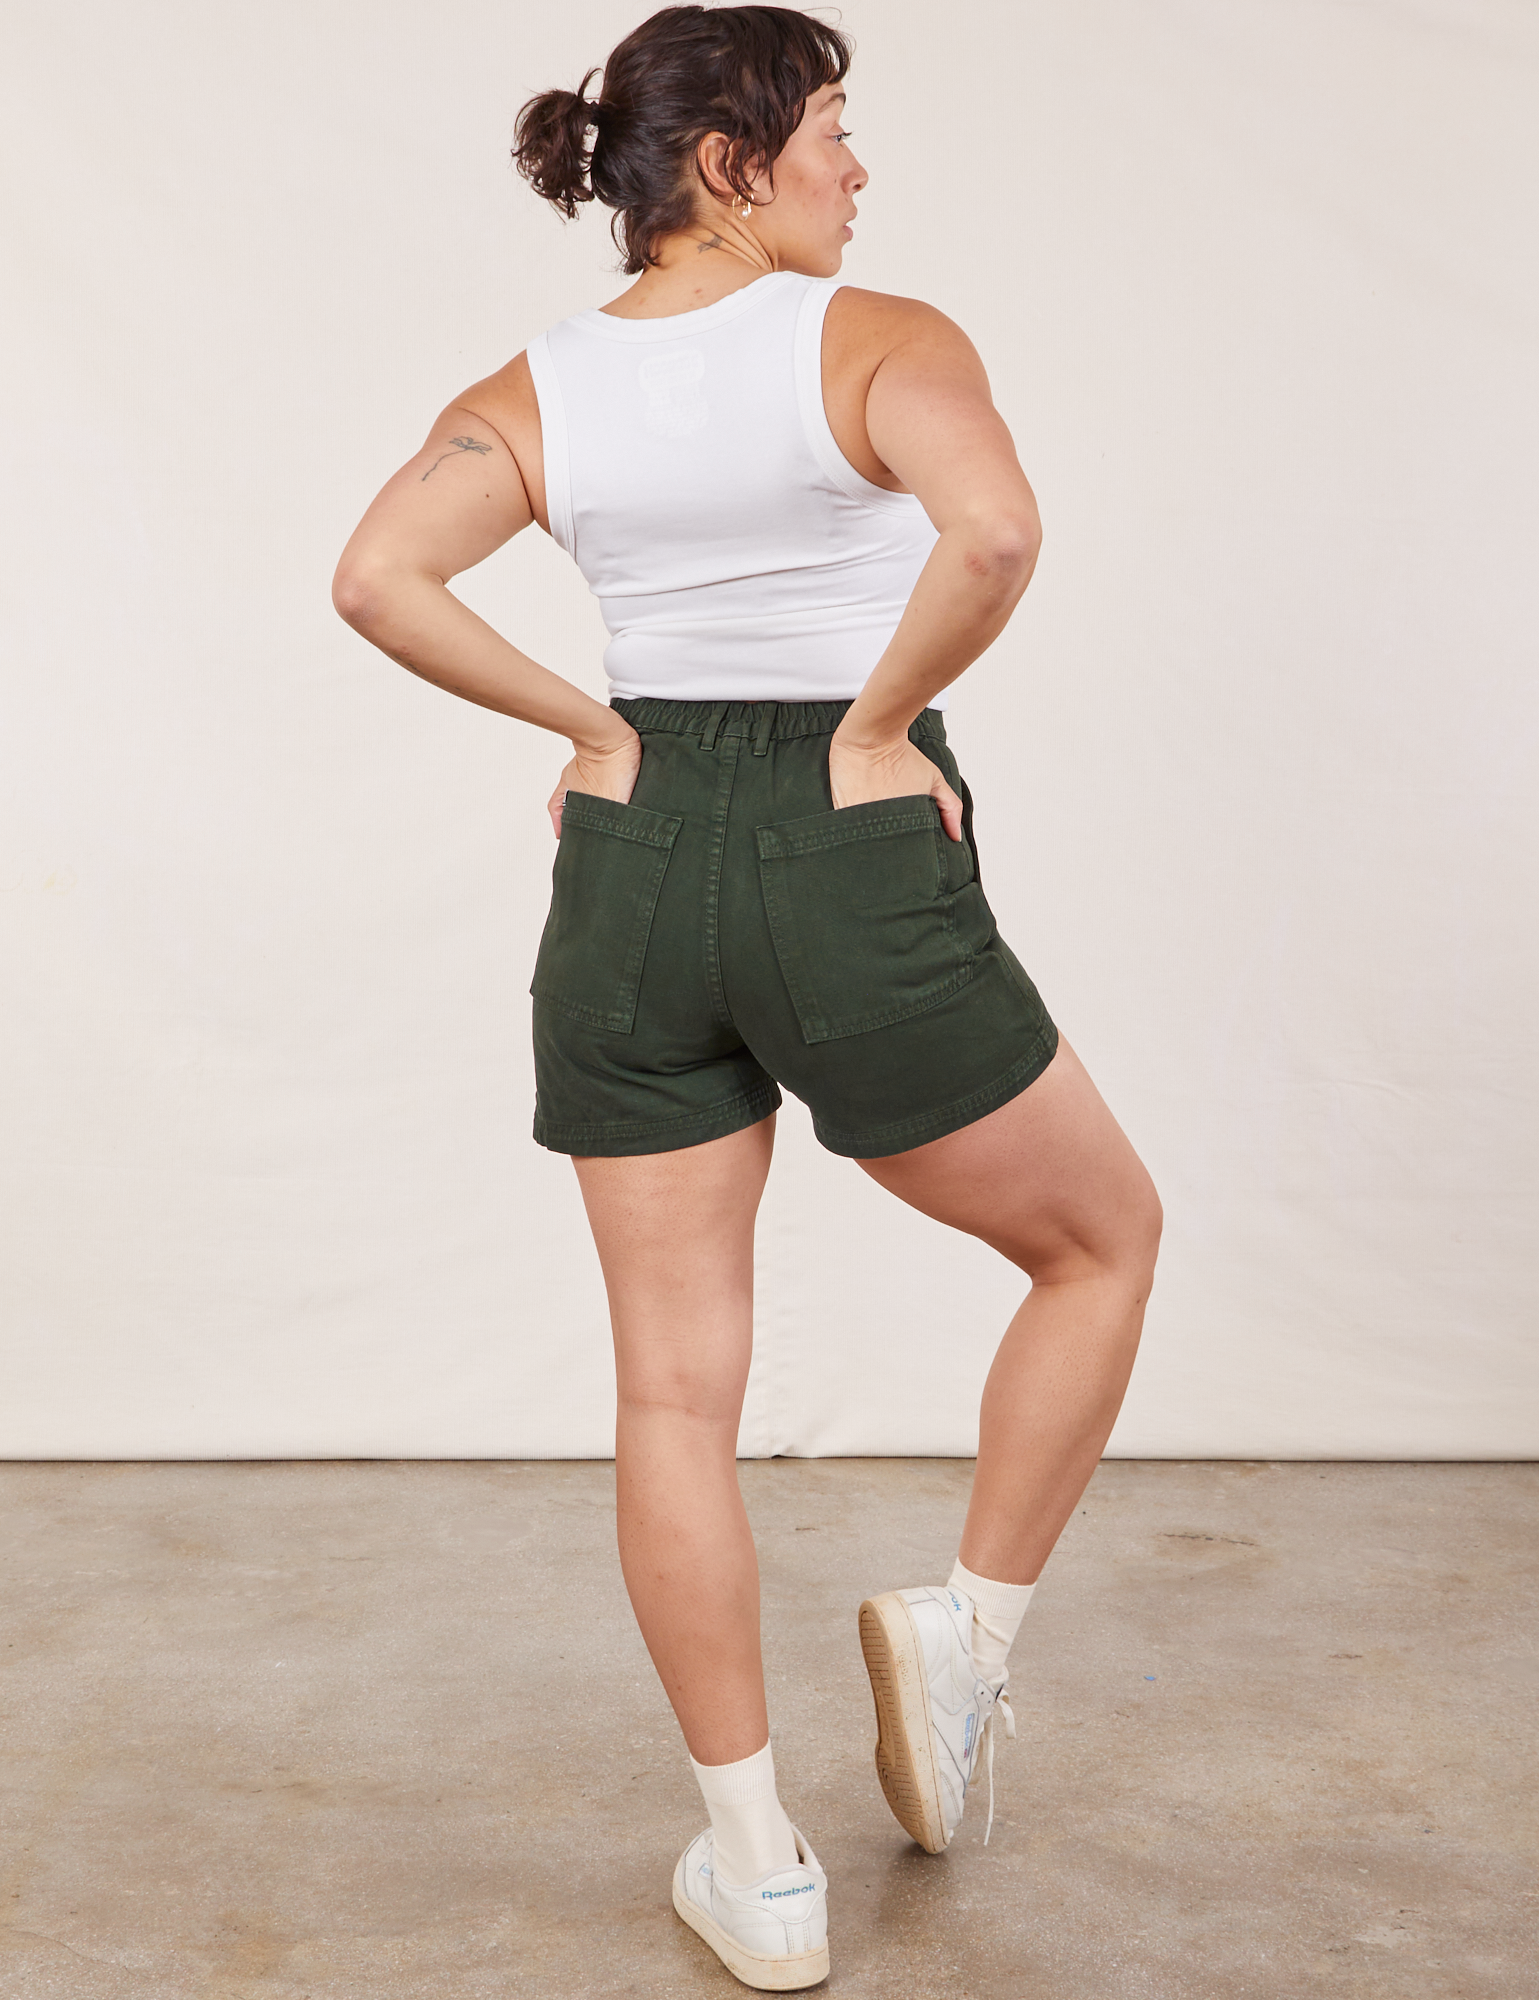 Back view of Classic Work Shorts in Swamp Green and Cropped Tank Top in vintage tee off-white on Tiara